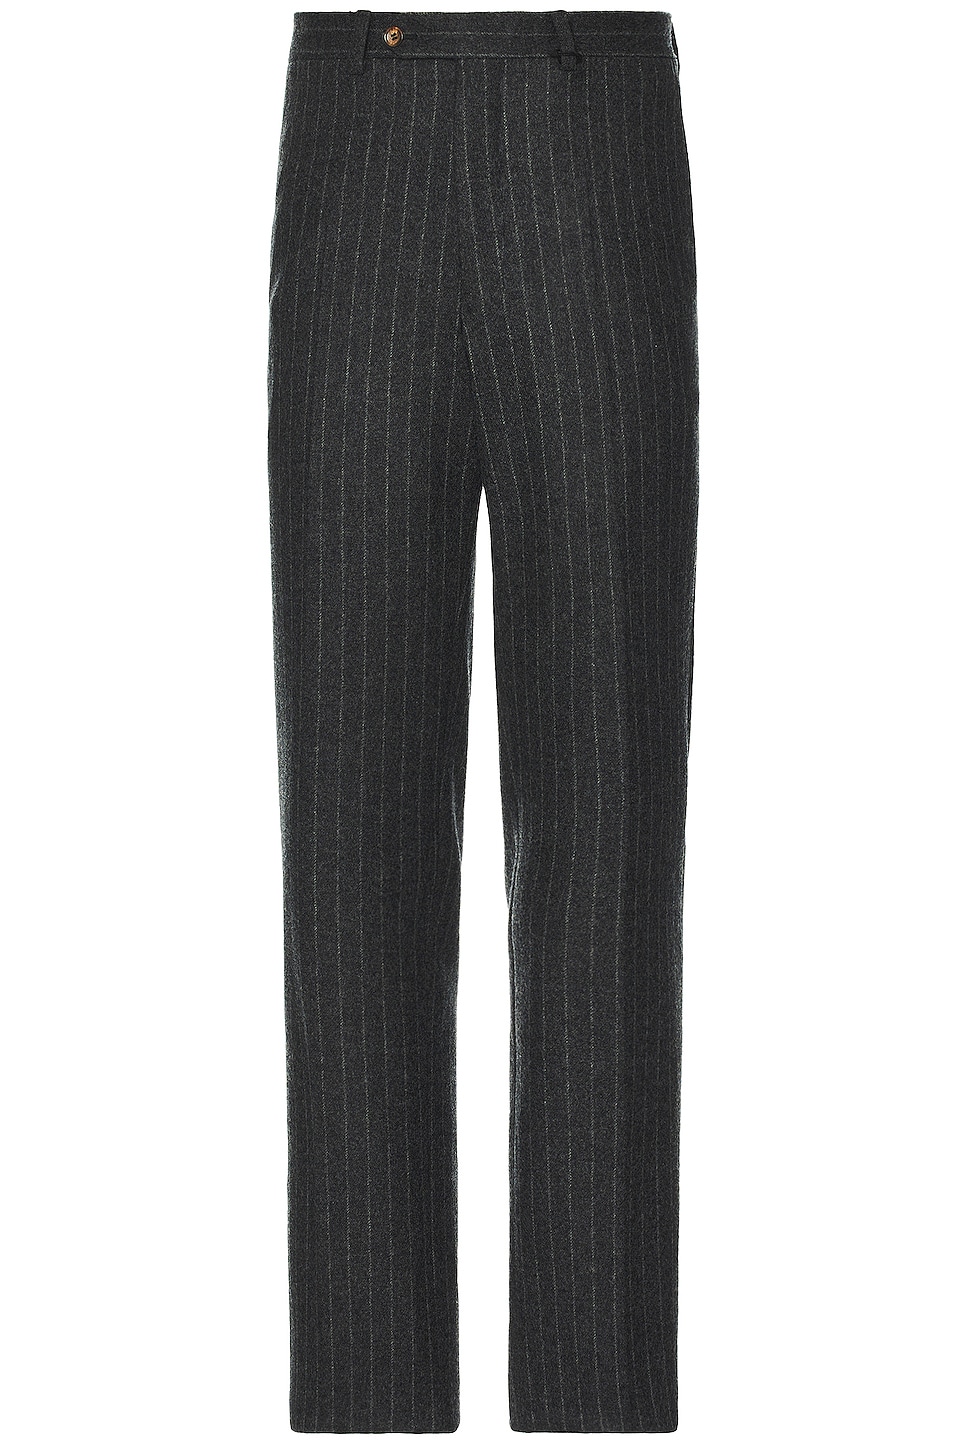 Image 1 of Bally Fox Brothers Trousers in Grey Melange